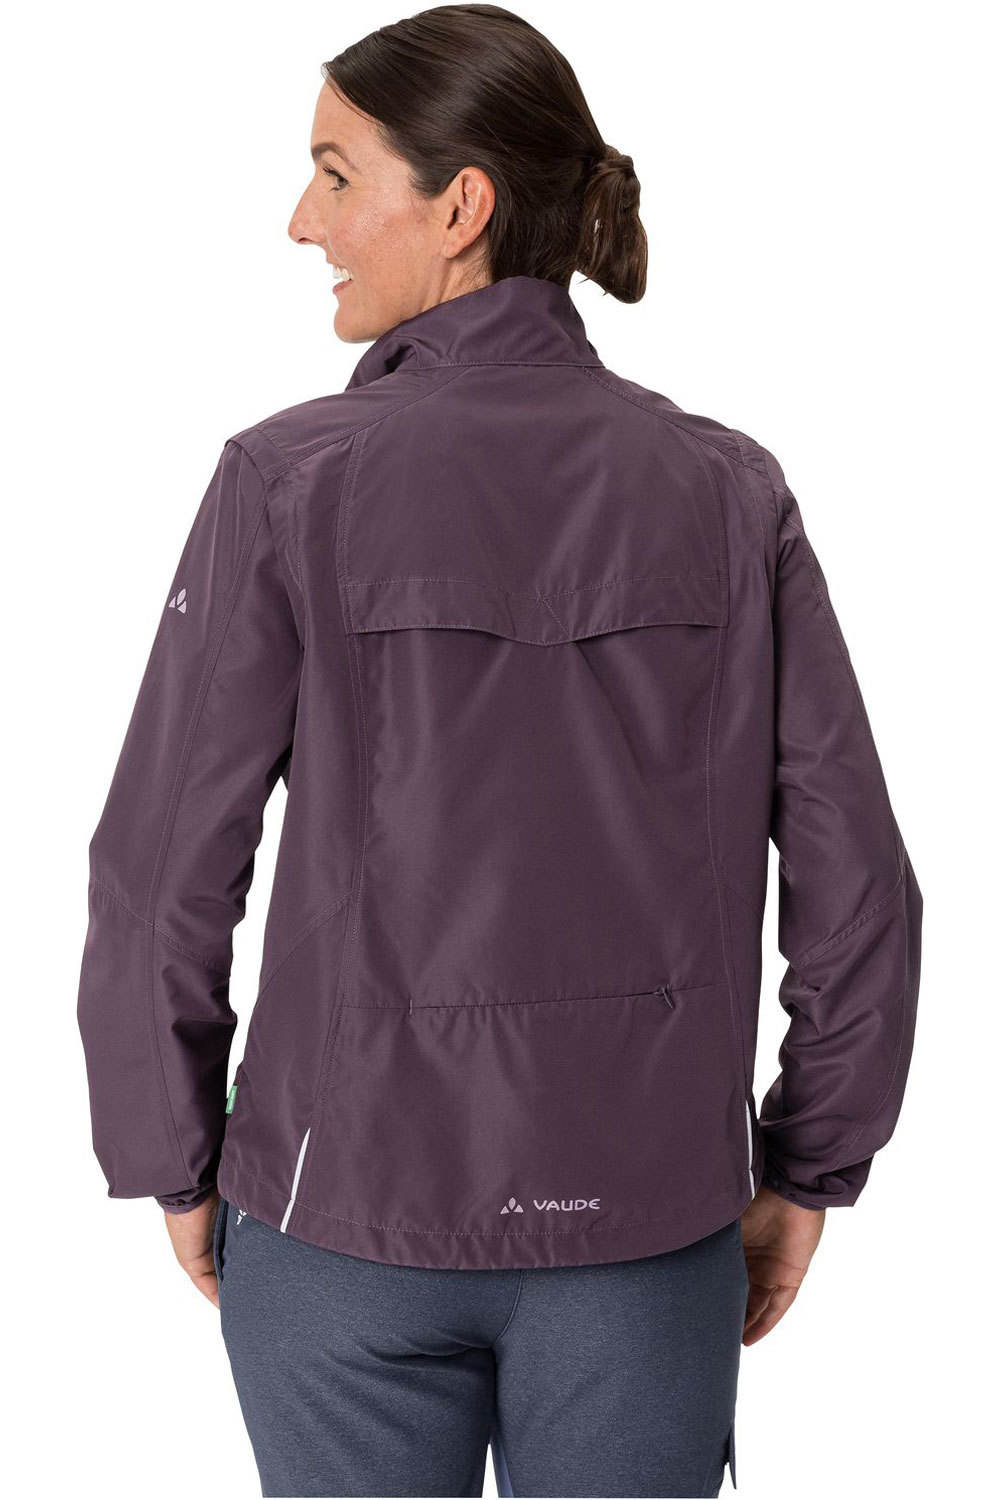 Vaude chaqueta impermeable ciclismo mujer Women's Dundee Classic ZO Jacket vista trasera